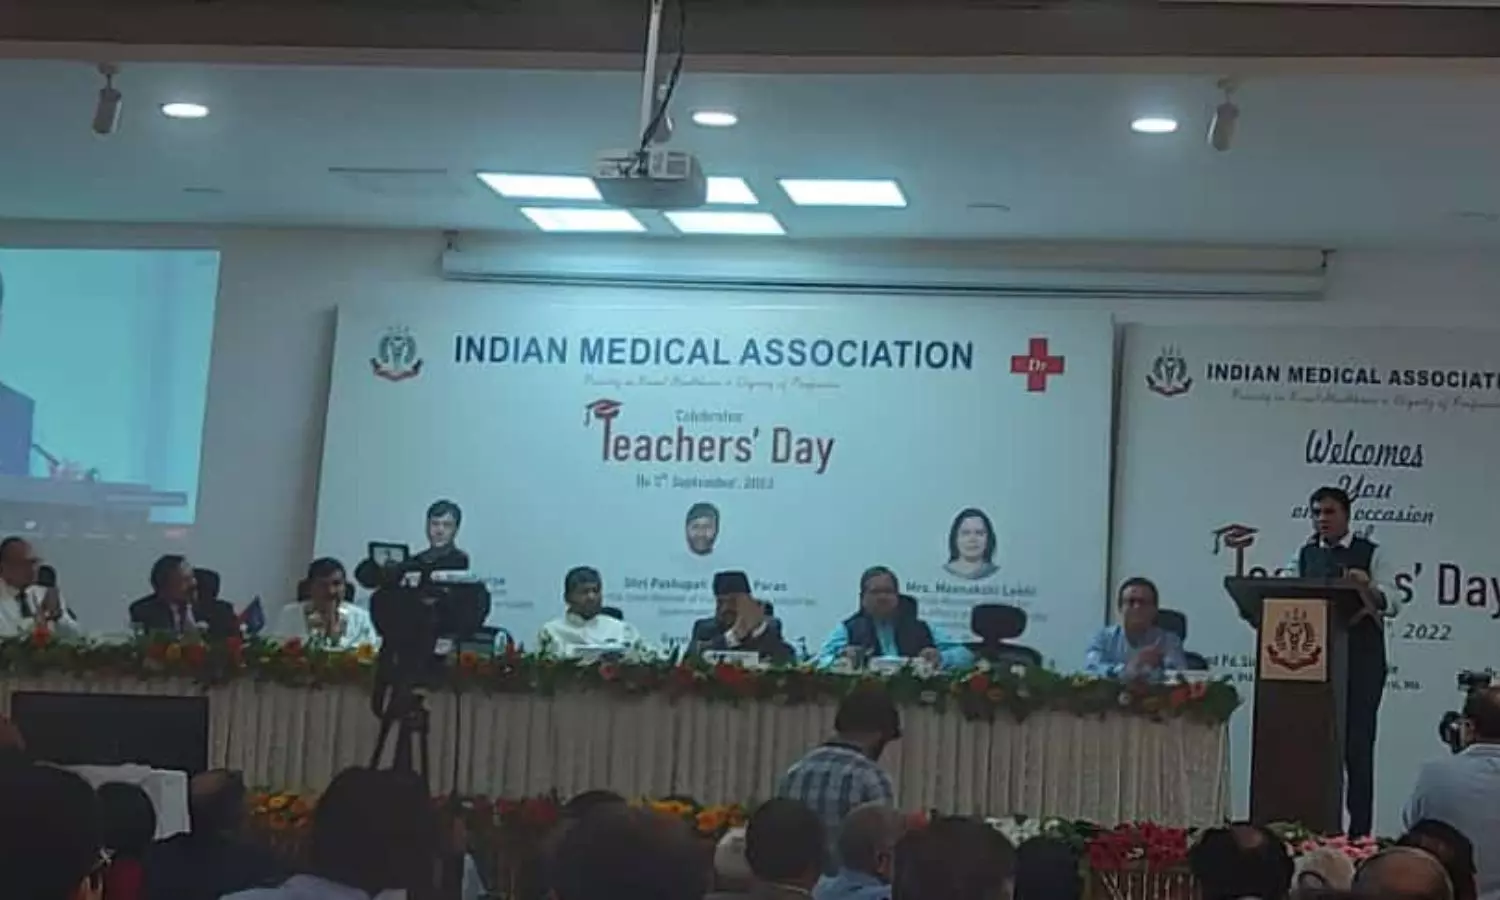 46 Doctors honoured with IMA Honorary Professorship on Teachers day